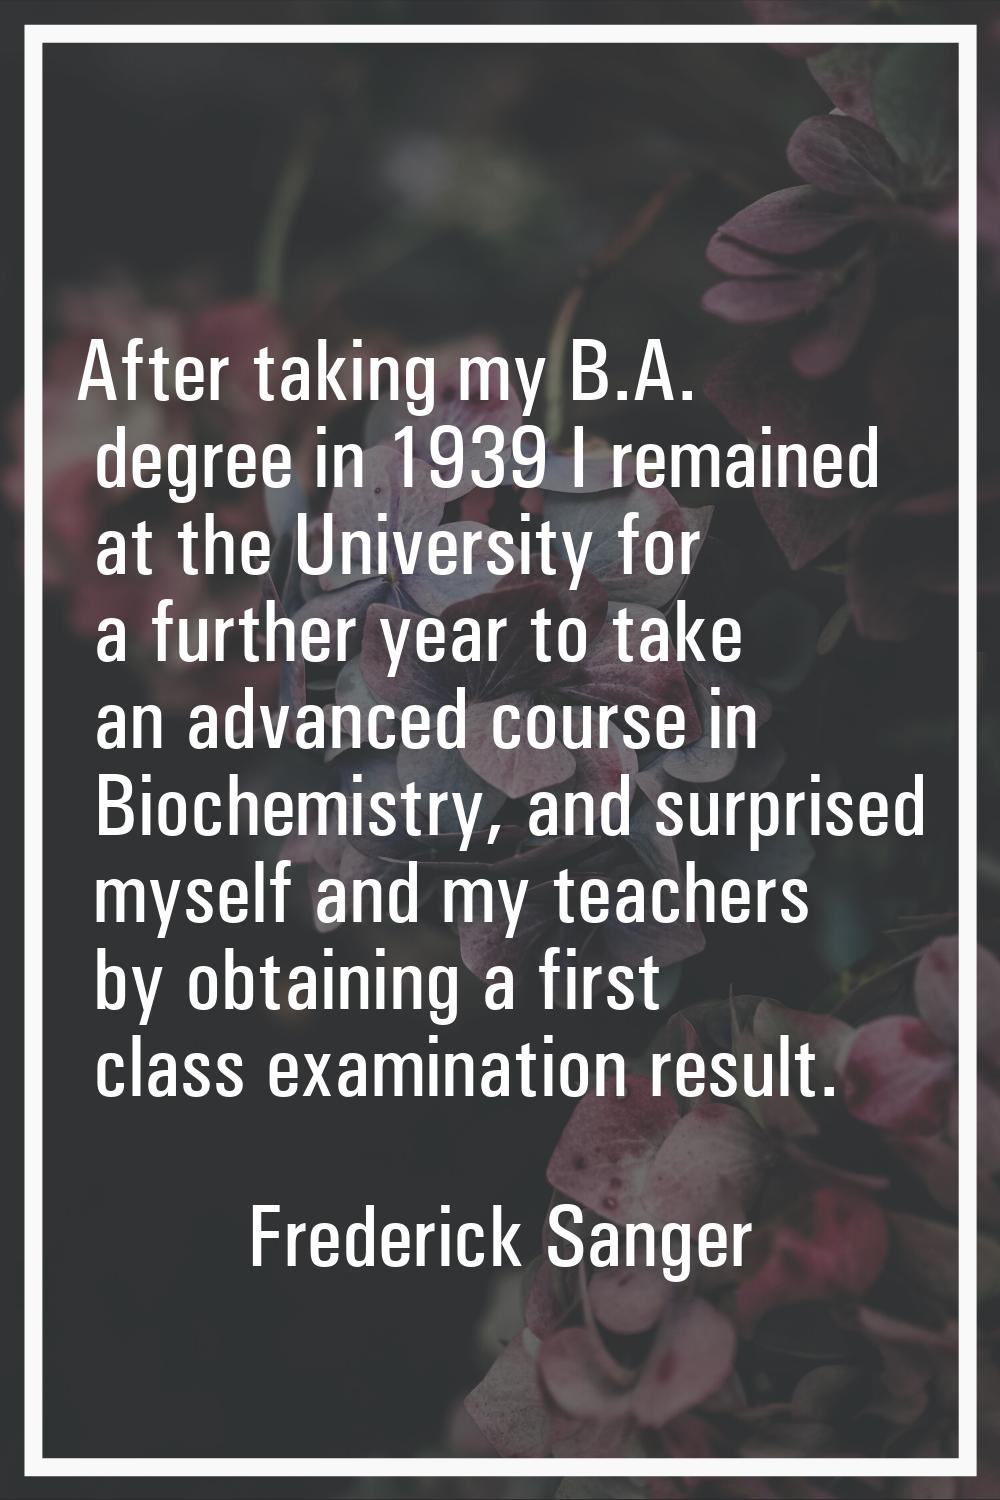 After taking my B.A. degree in 1939 I remained at the University for a further year to take an adva